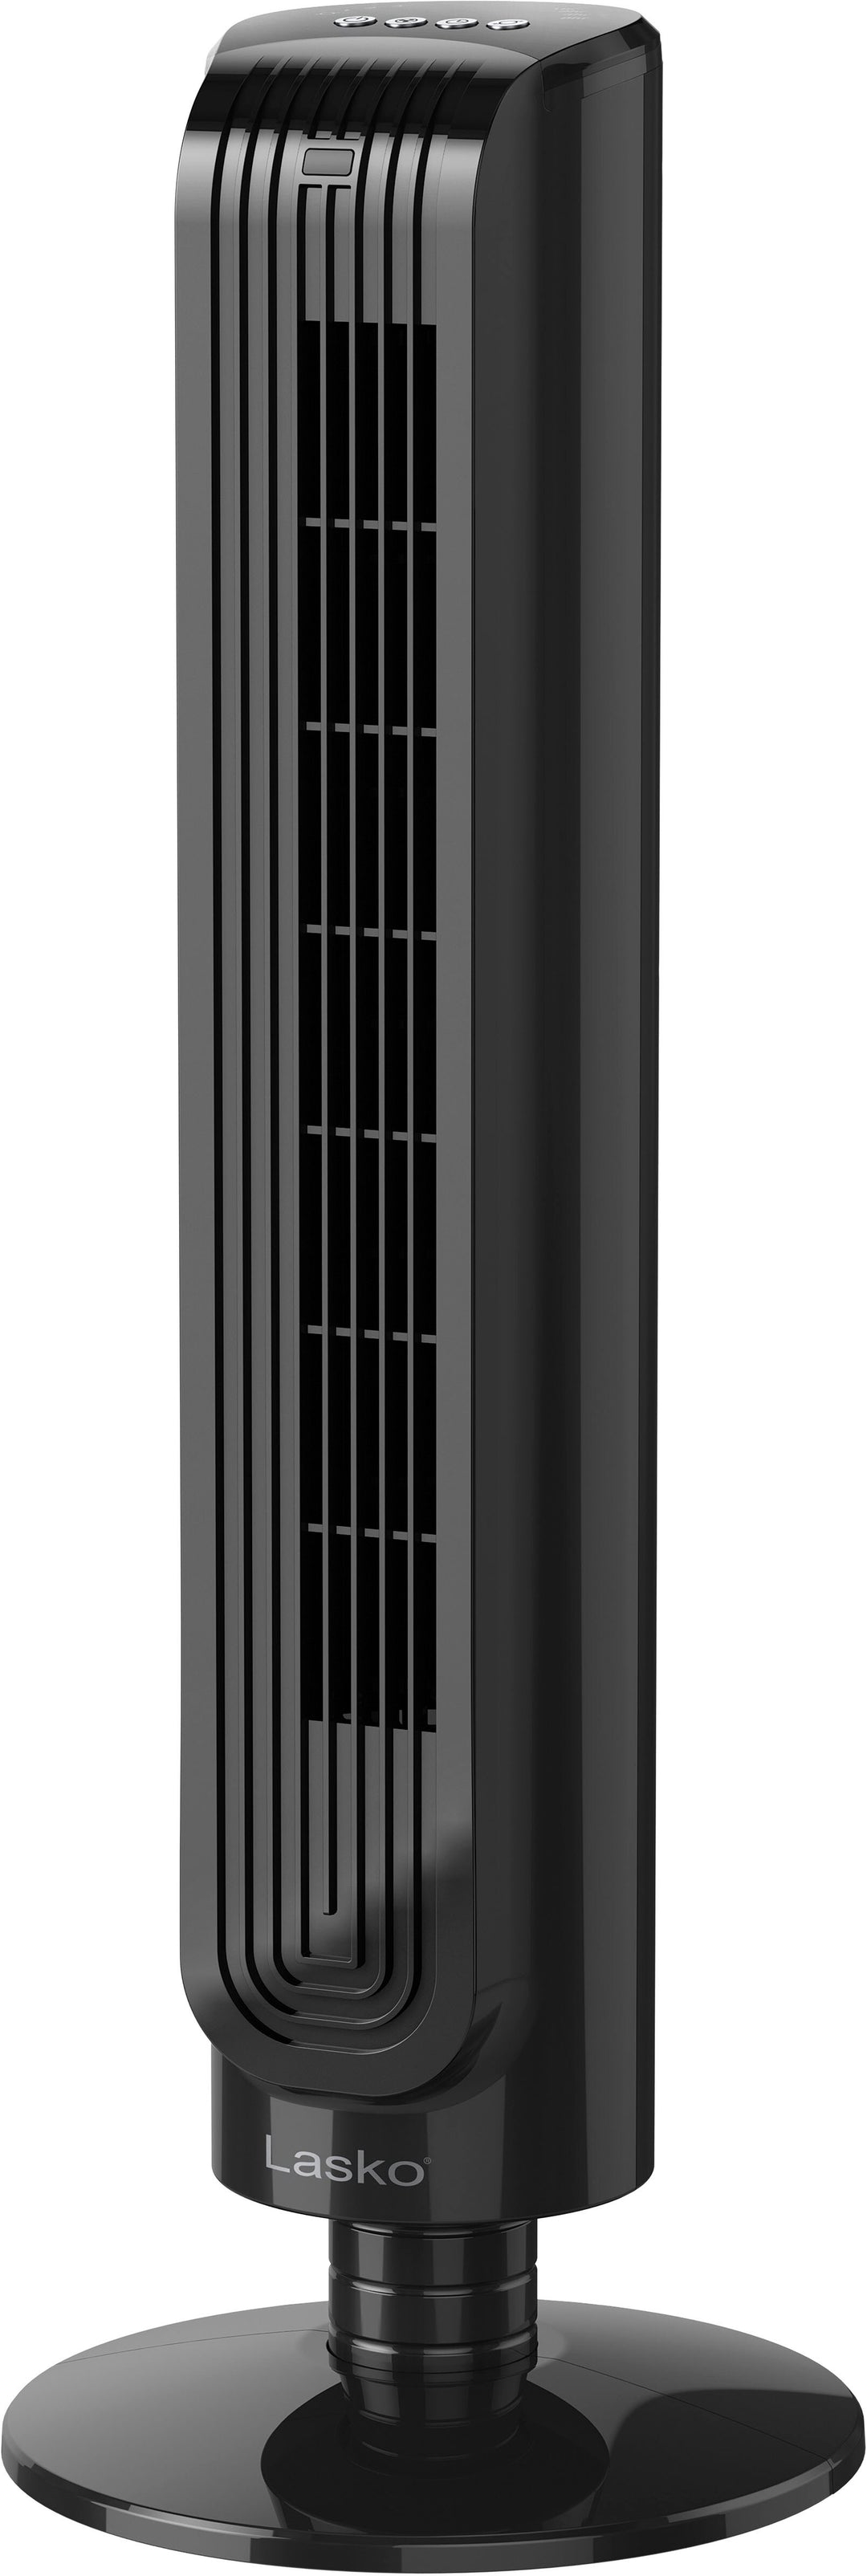 Lasko 3-Speed Oscillating Tower Fan with Timer and Remote Control - Black_6